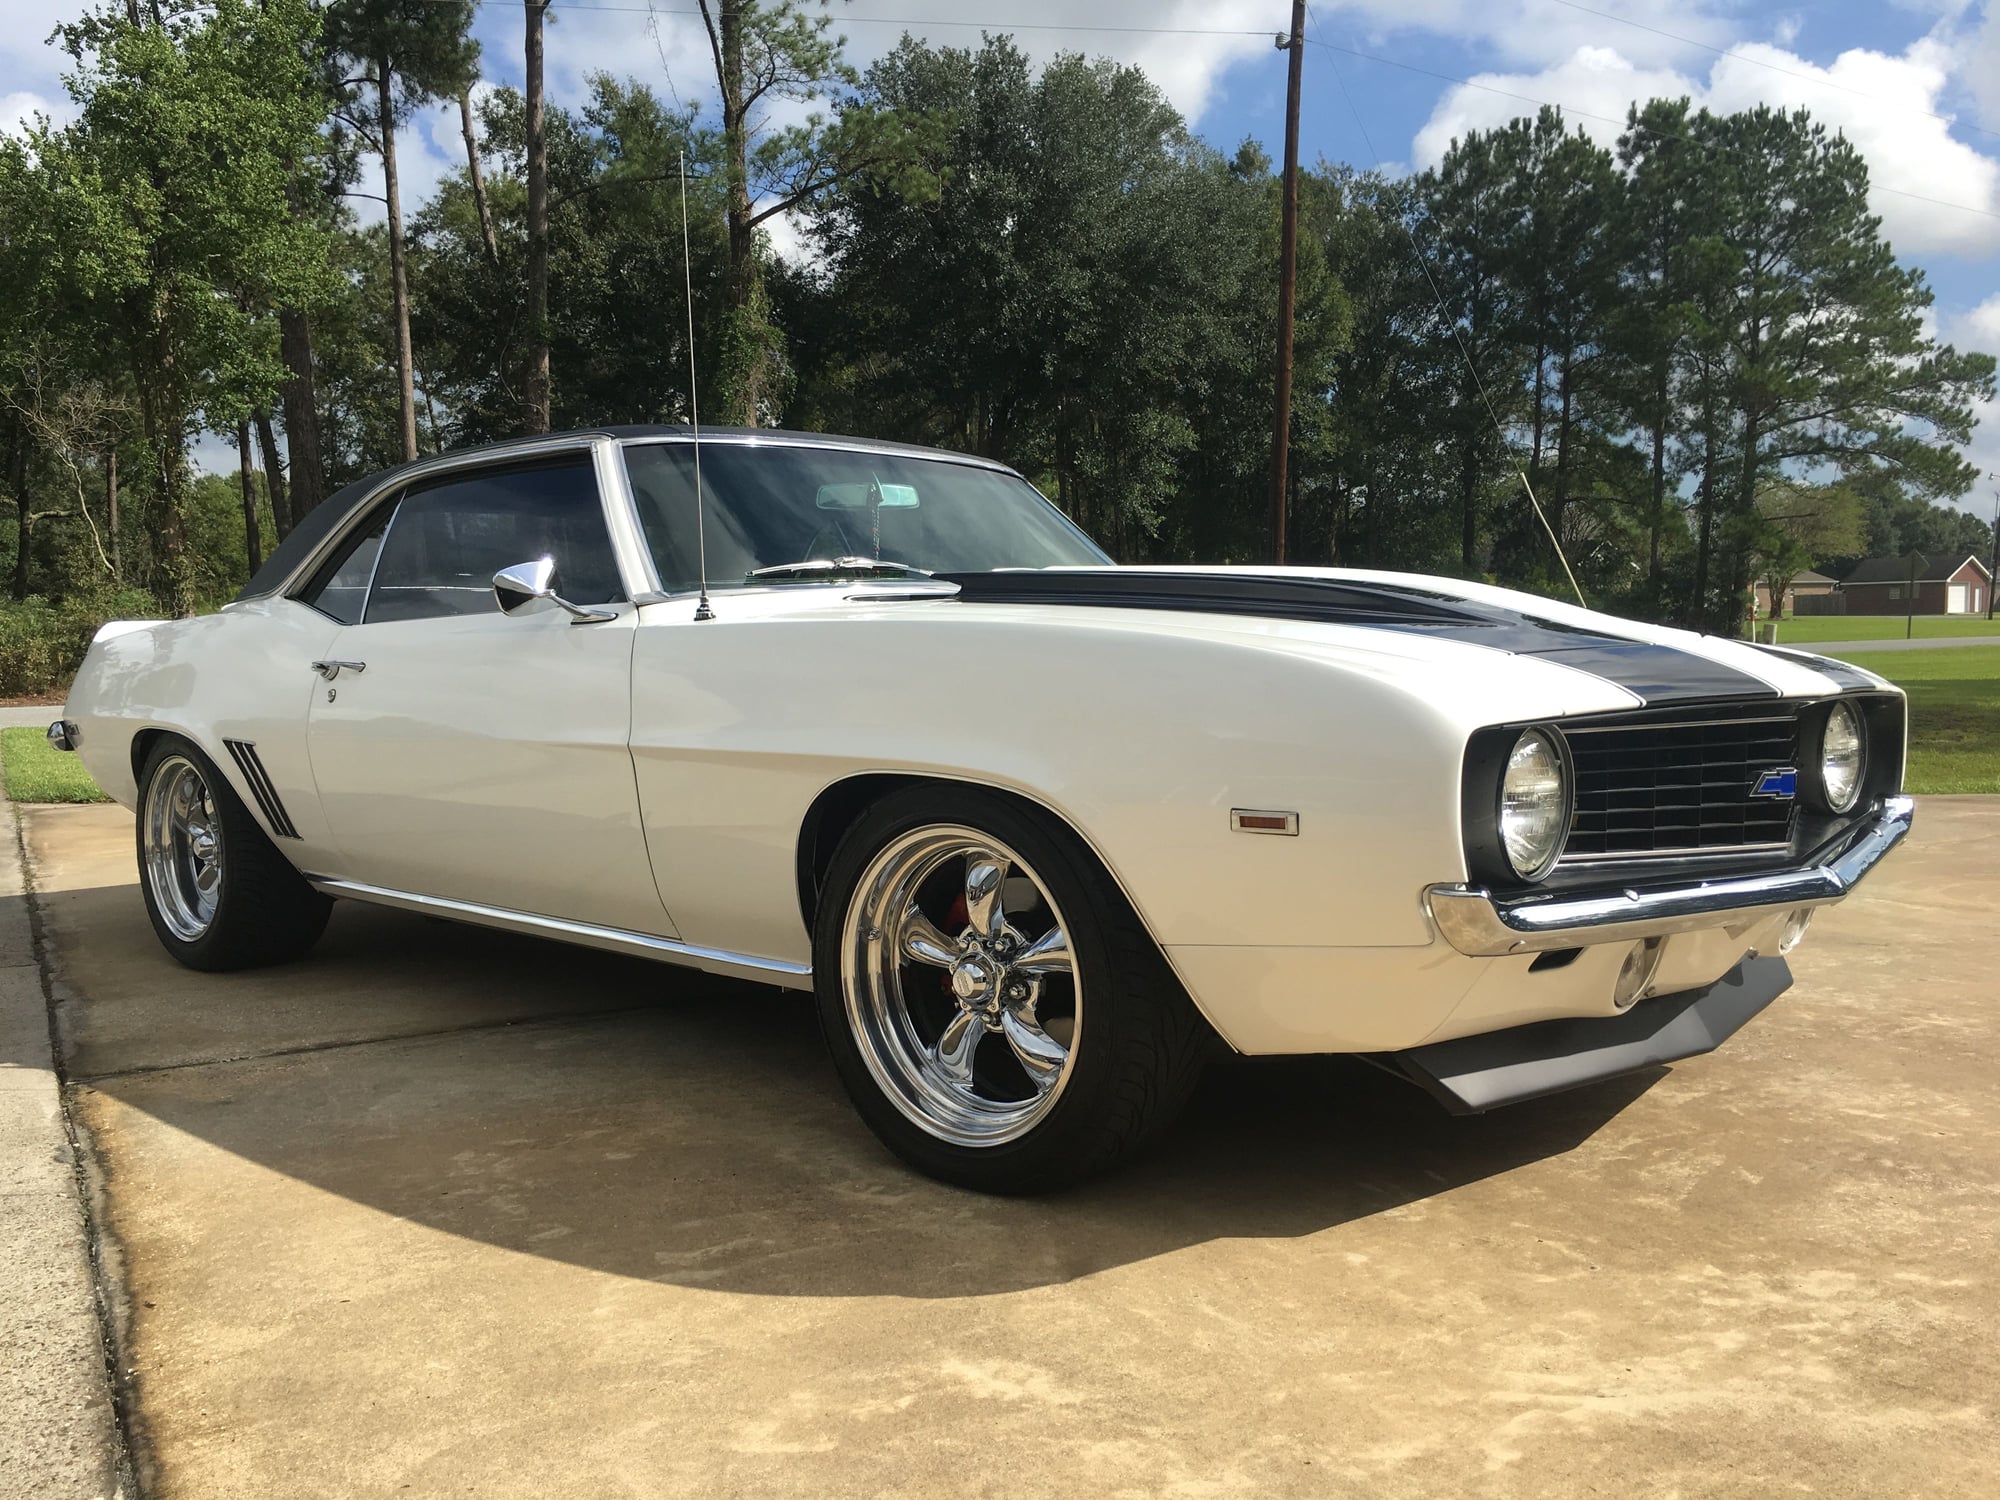 1969 Chevrolet Camaro - 1969 LS1 Camaro Pro Touring - Used - VIN 1Z3379N651850 - 8 cyl - 2WD - Automatic - Coupe - White - Lake Charles, LA 70601, United States